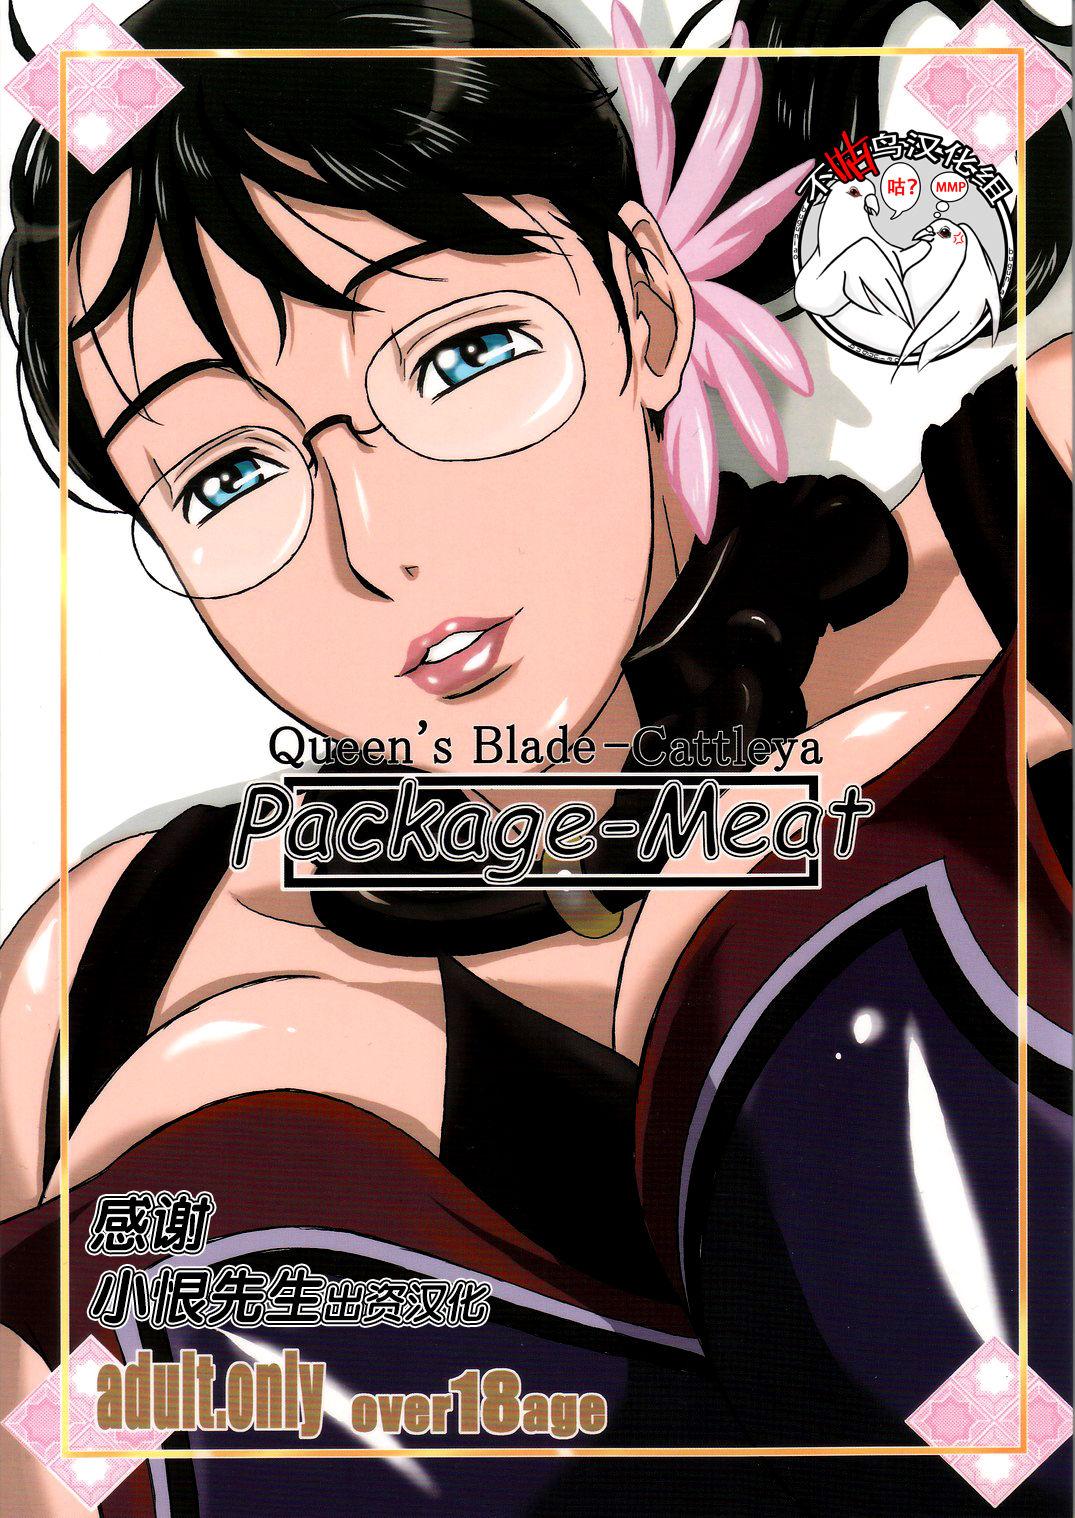 Cums (C72) [Shiawase Pullin Dou (Ninroku)] Package Meat (Queen's Blade) [Chinese] amateur coloring version - Queens blade Ballbusting - Picture 1